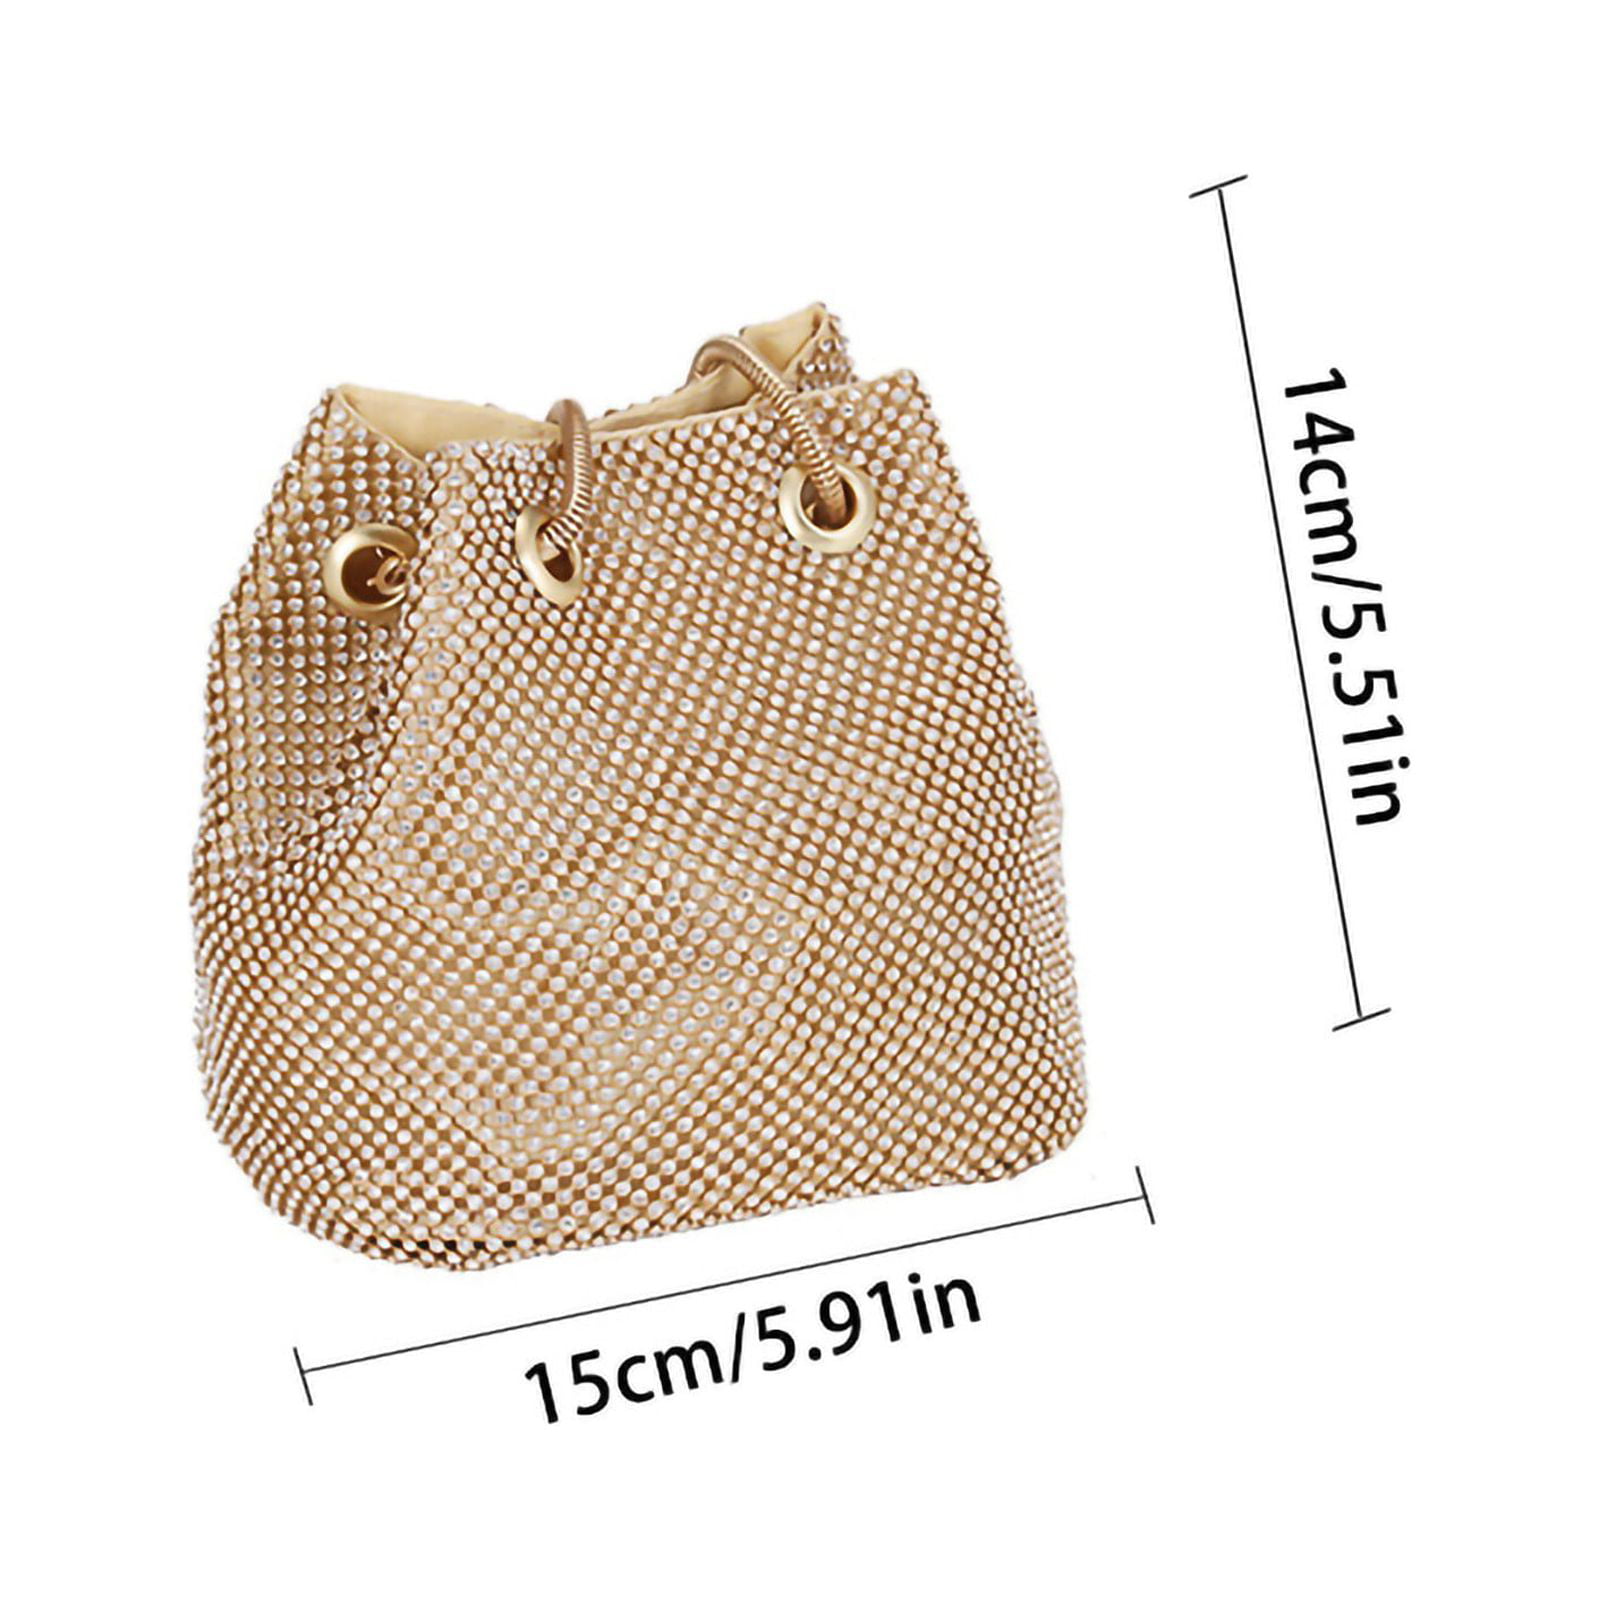 Simple casual and party sling bags 50%- 70% off women